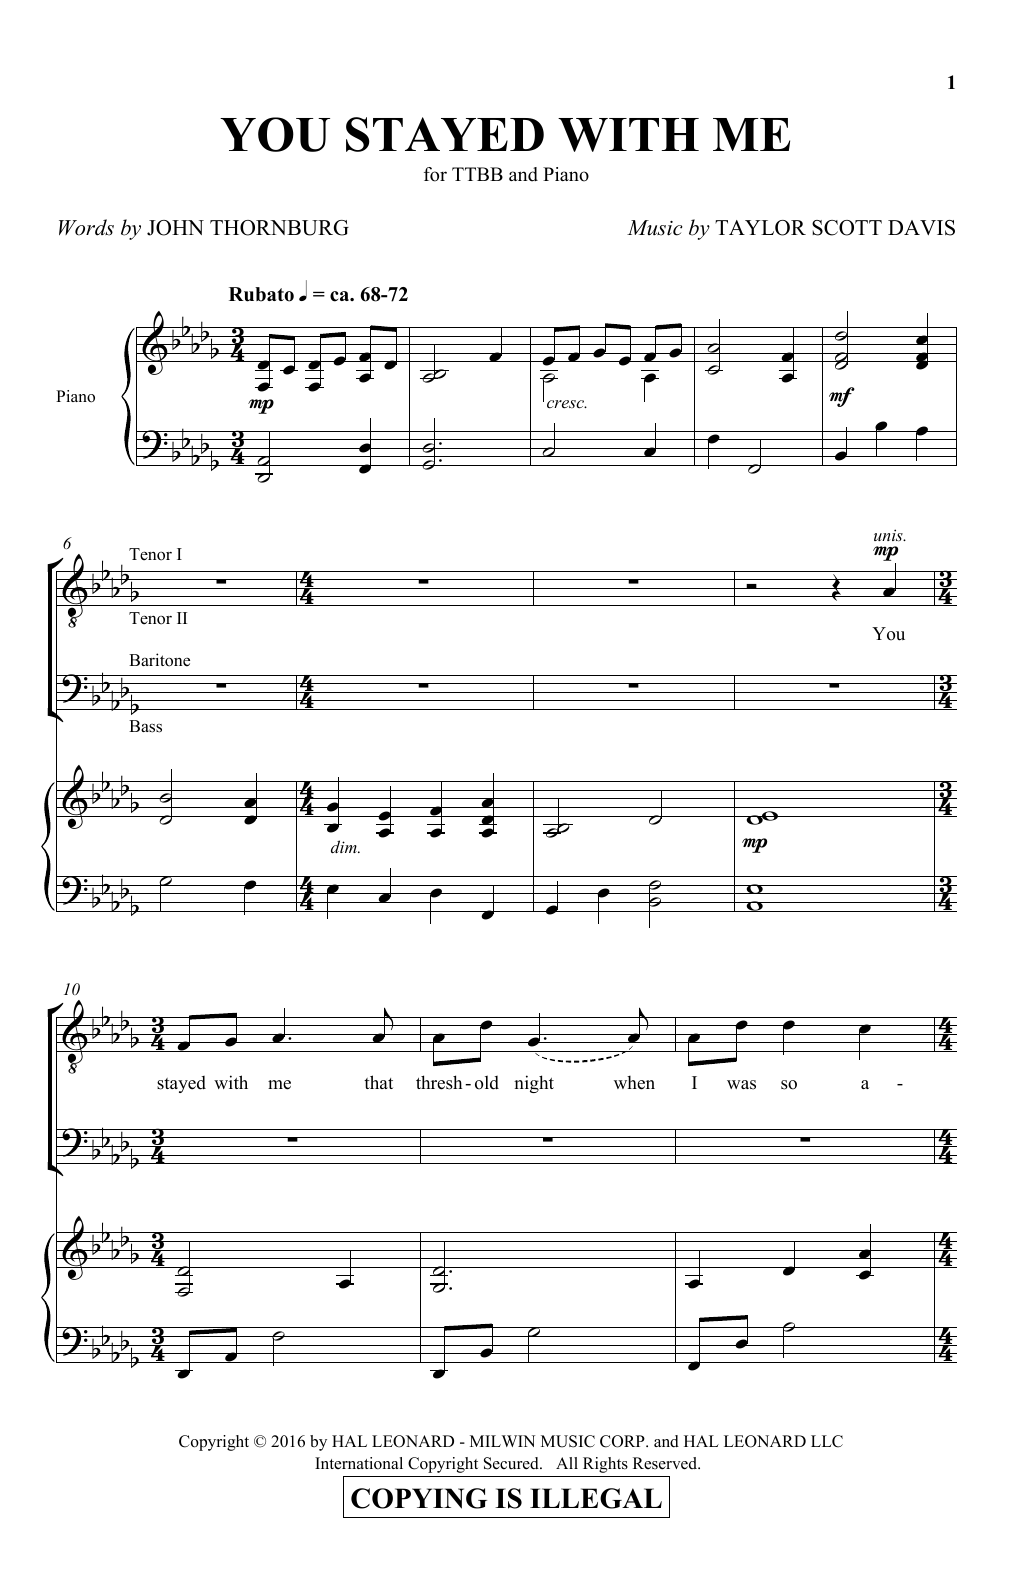 Download Taylor Scott Davis You Stayed With Me Sheet Music